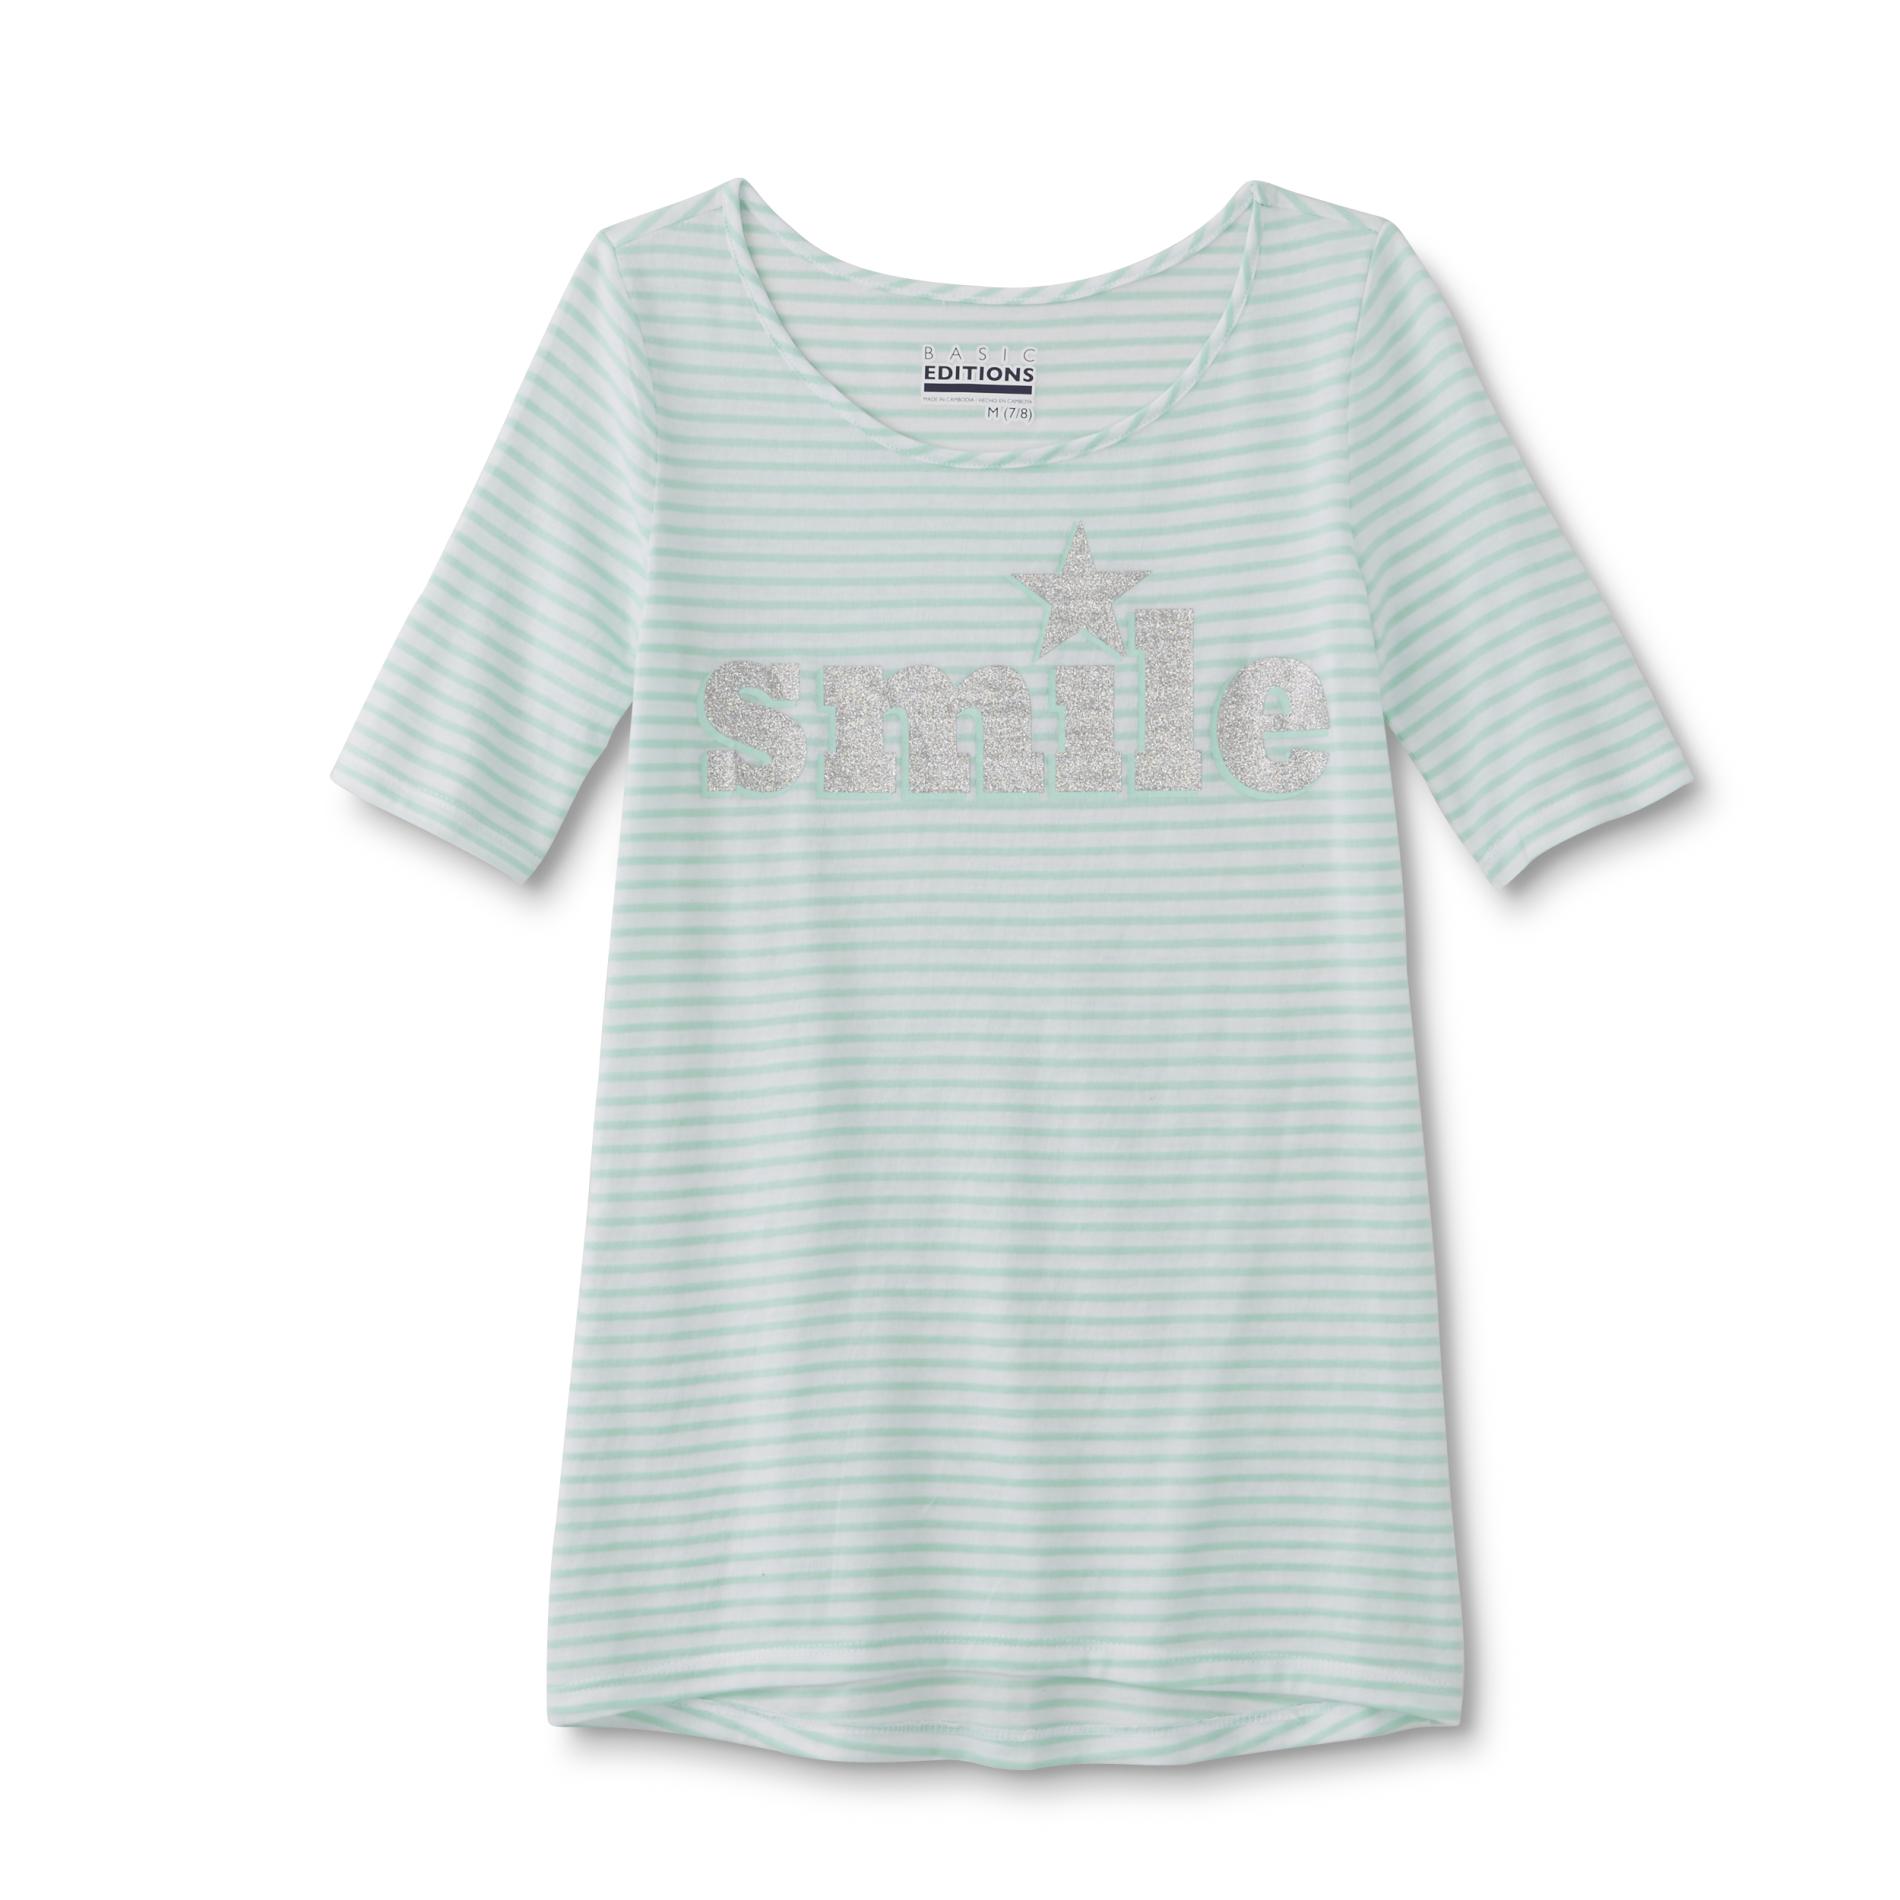 Basic Editions Girl's Graphic T-Shirt - Smile